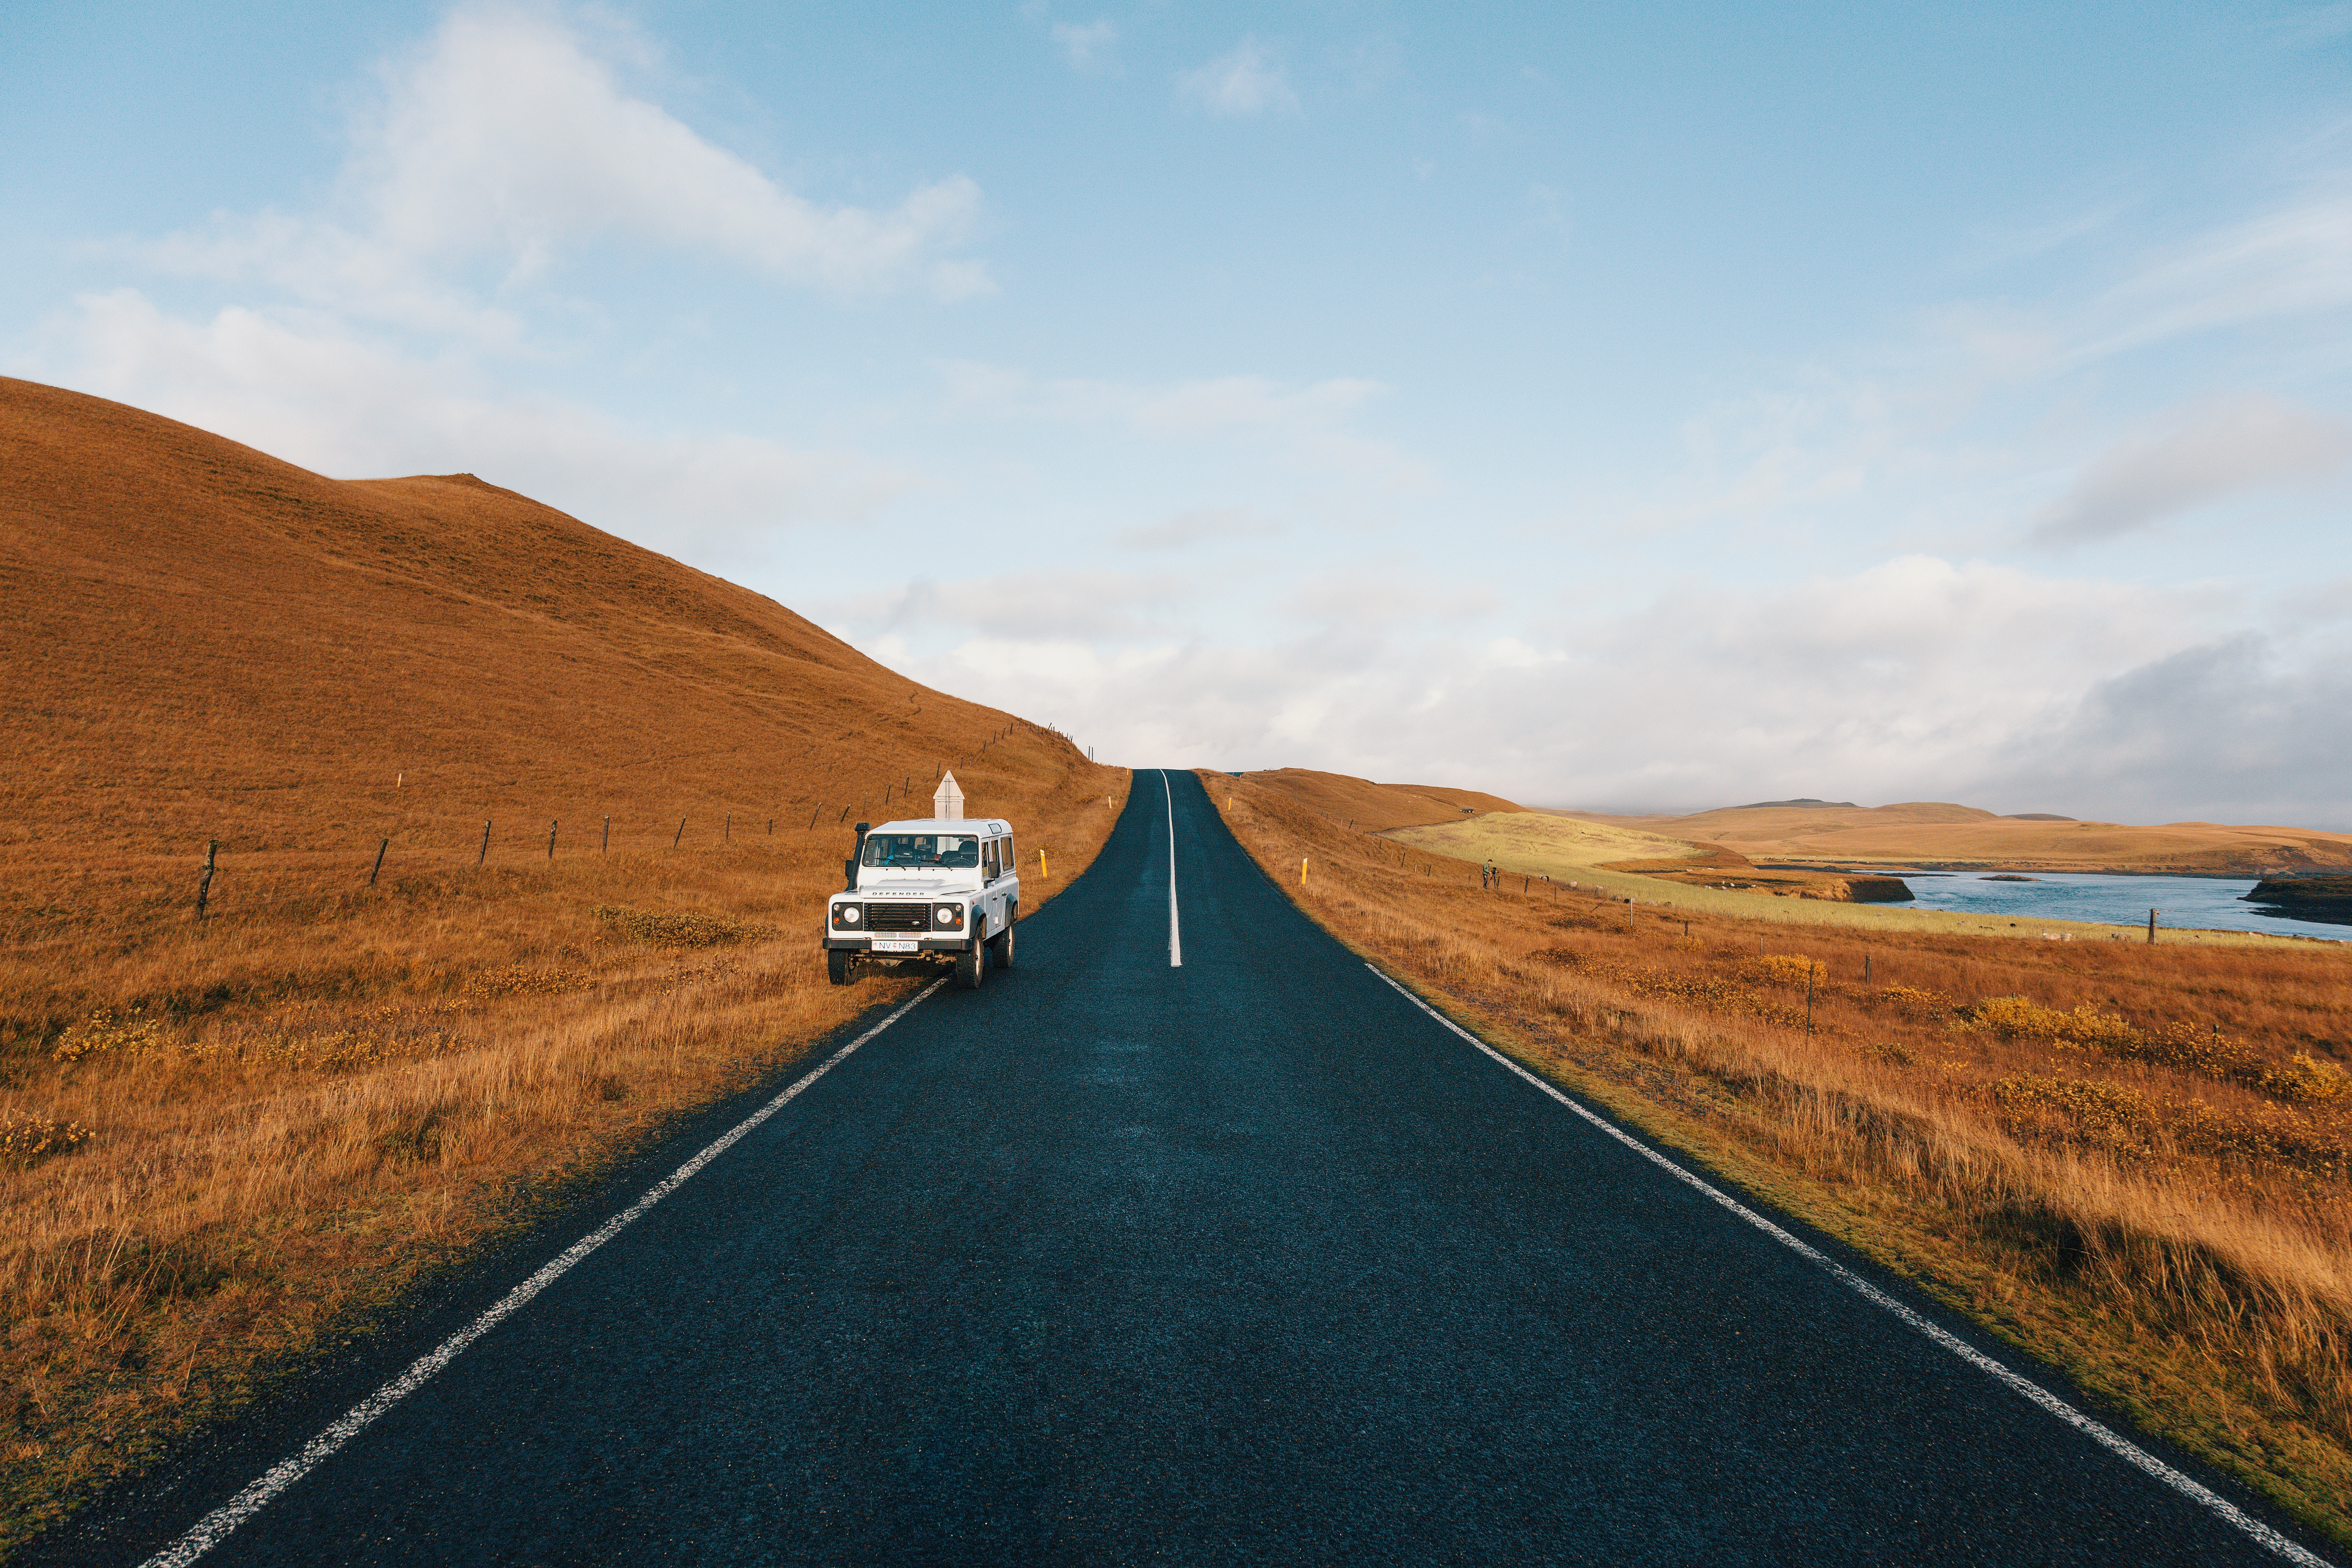 5472x3648 verge, filed, open road, off road, landscape, fence, lane, route, travel, PNG image, road, jeep, explore, parked, car, lake, road by the filed, open drive, stop, hill, grass